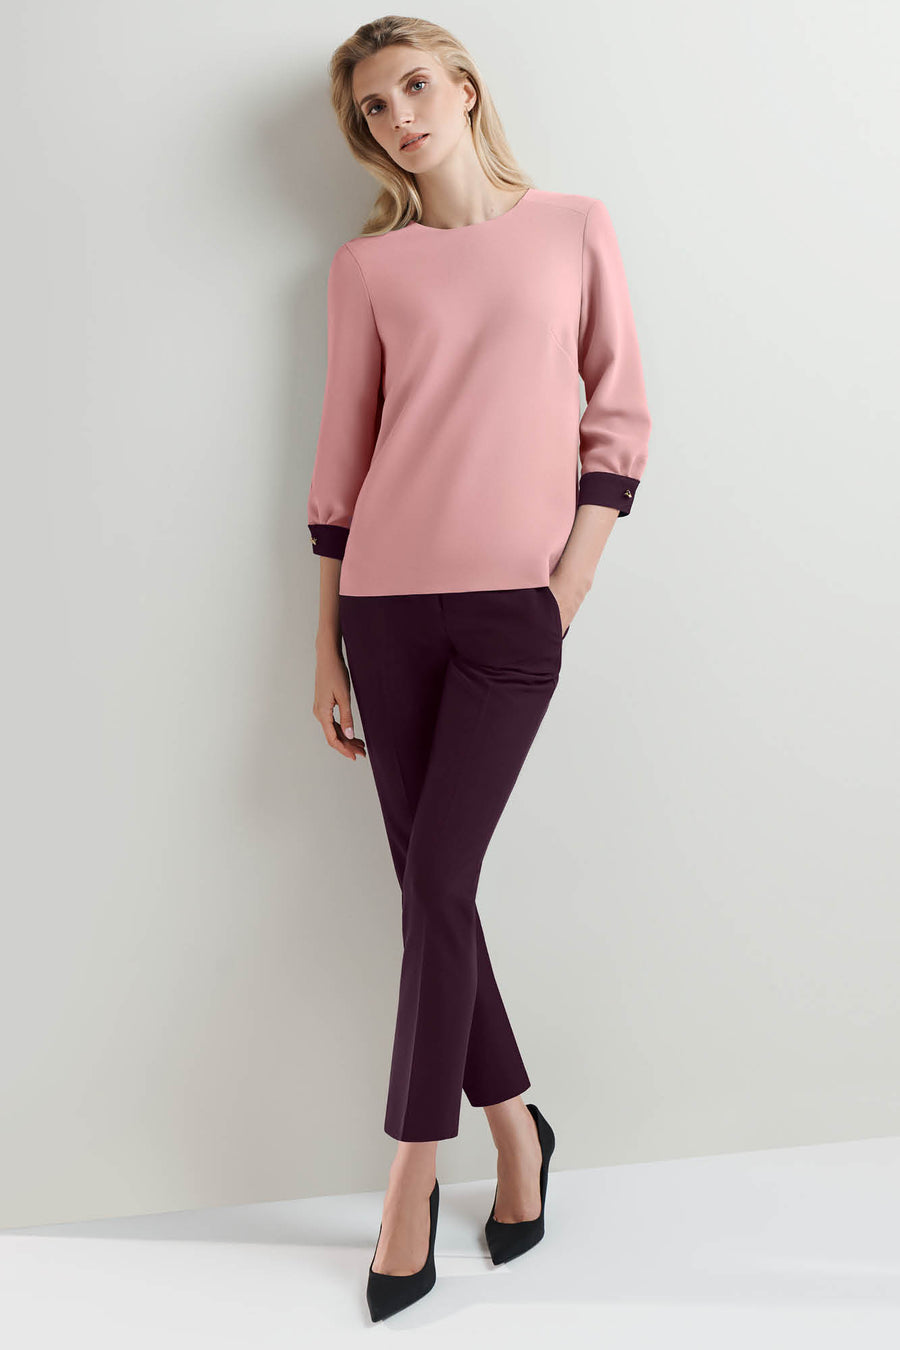 Marwell Rose and Aubergine Top